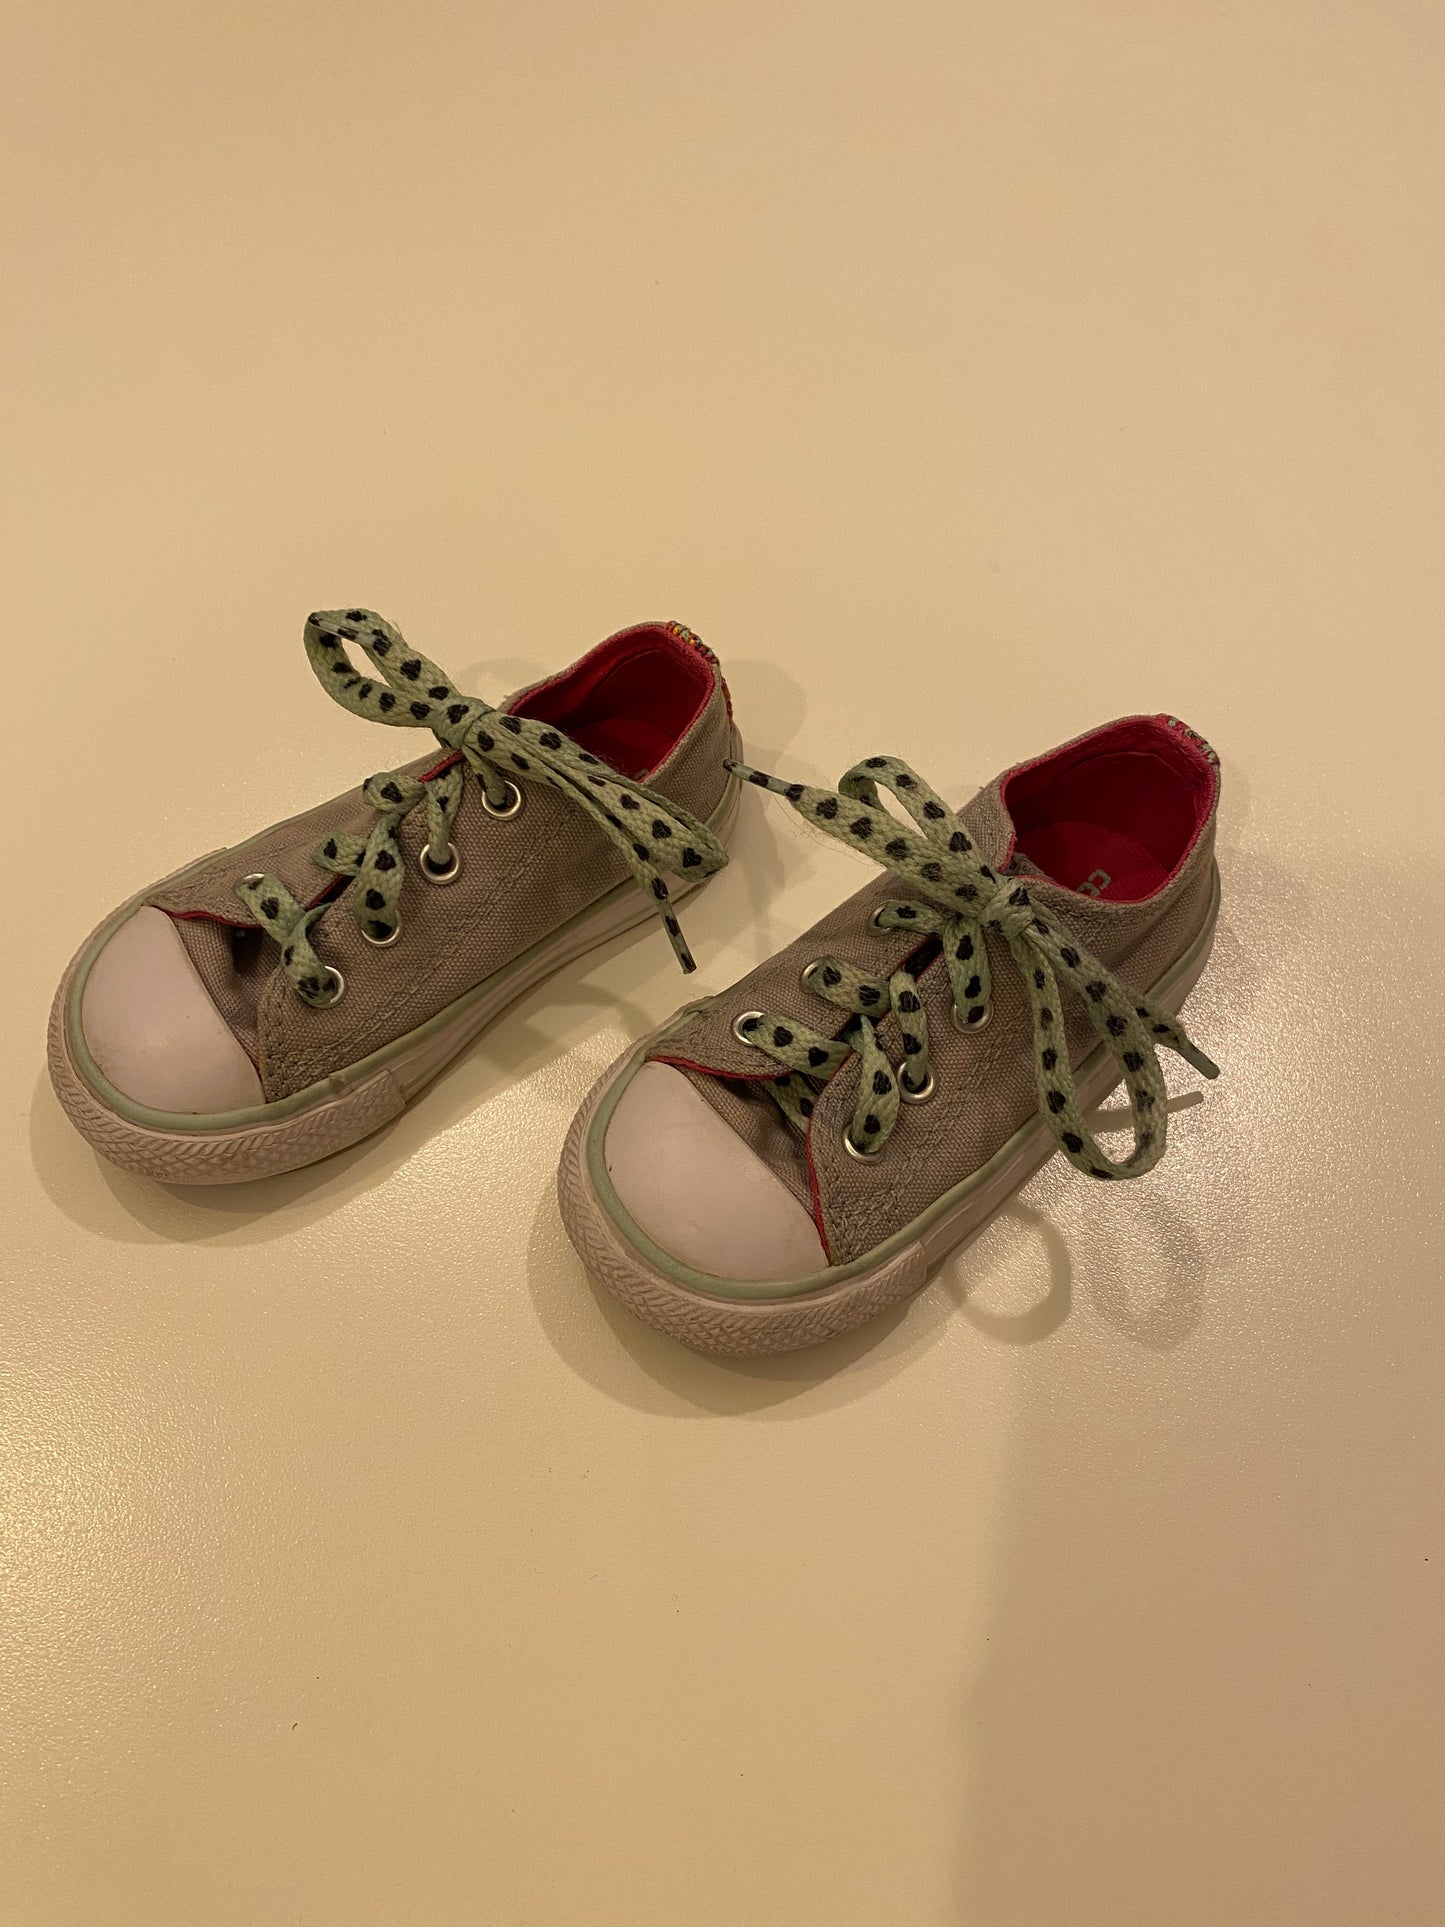 Converse Low Top w/ Double Tongue Light Gray & Mint Green w/ hearts Girls Size 6